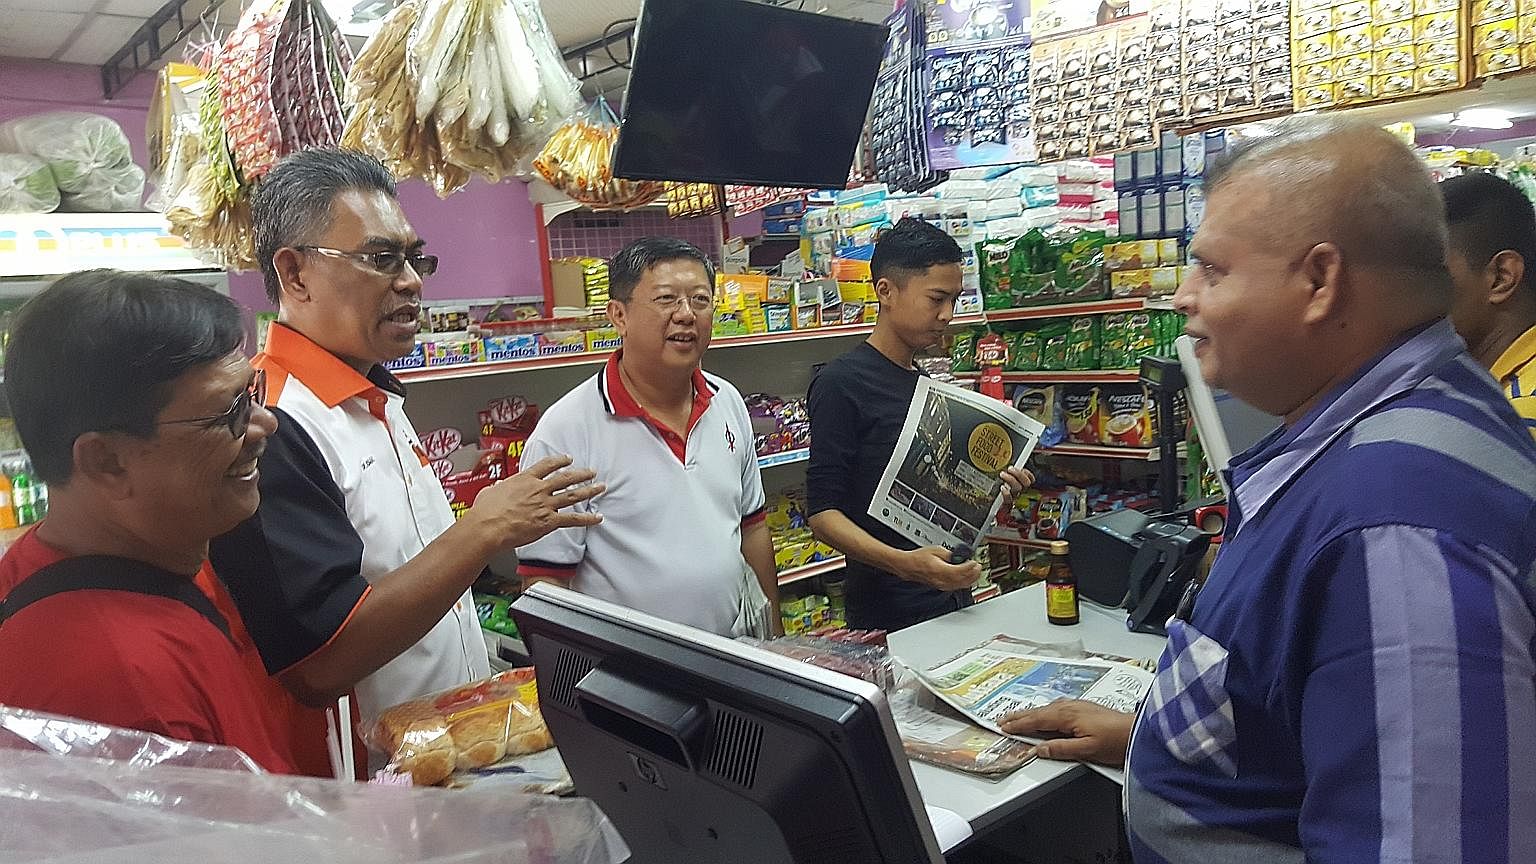 Kedah Amanah chief Ismail Salleh speaking with residents as he and DAP assemblyman Tan Kok Yew work the ground in Ayer Hitam in Kedah. Their Pakatan Harapan alliance is going all out to break the ruling coalition's grip in state strongholds, hoping t